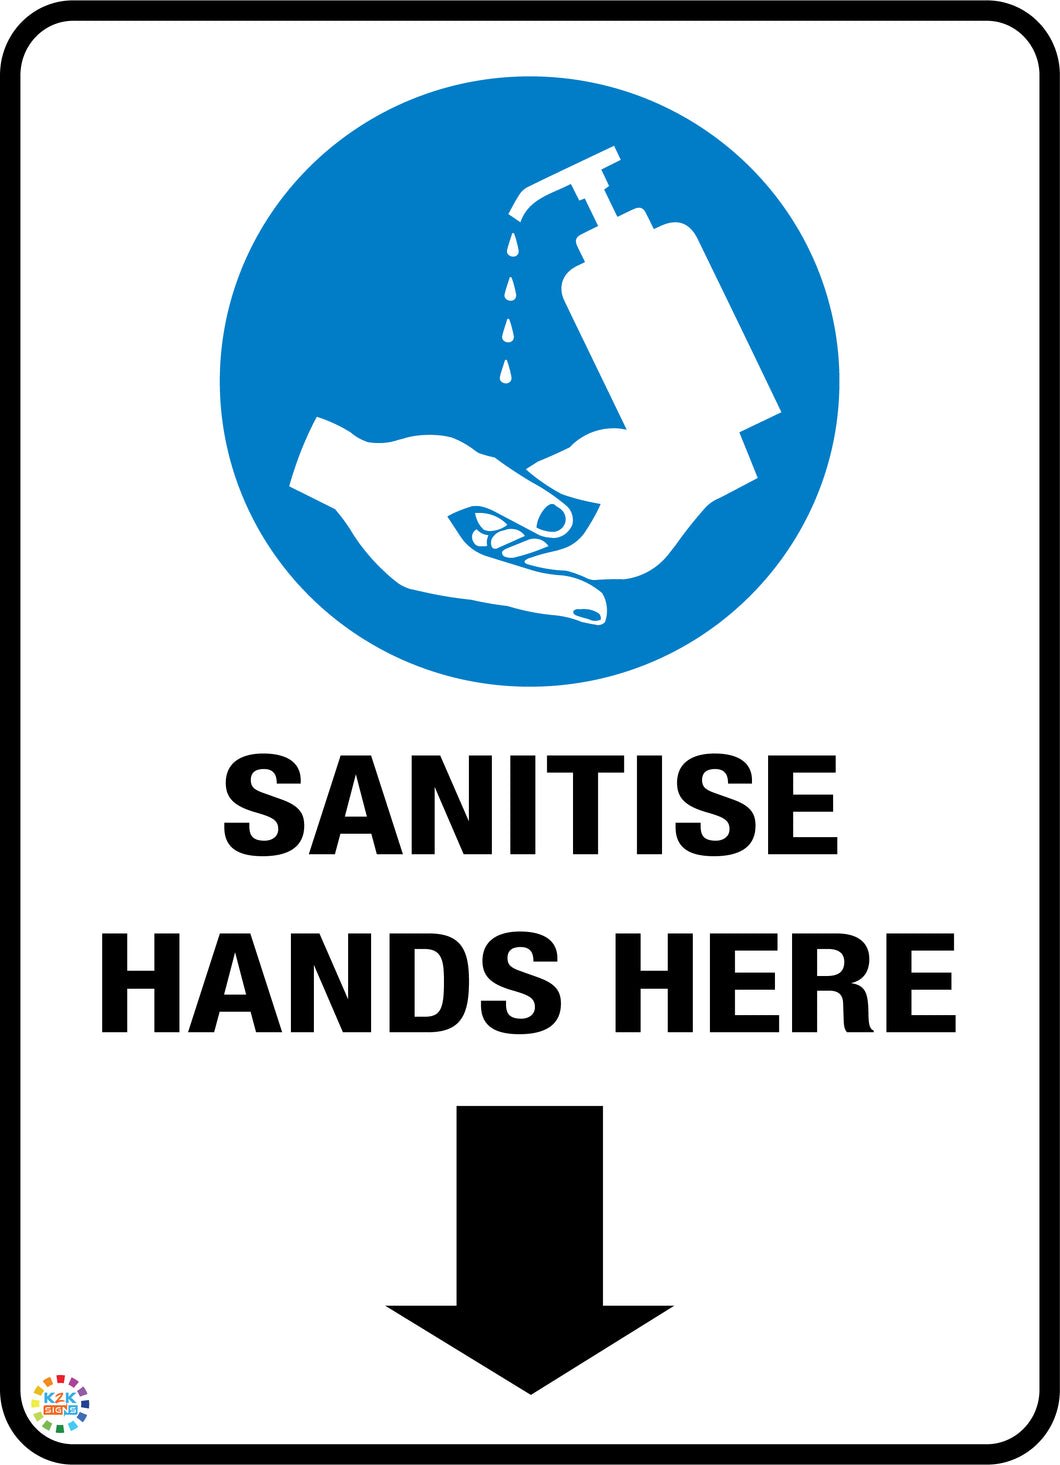 Sanitise Hands Here